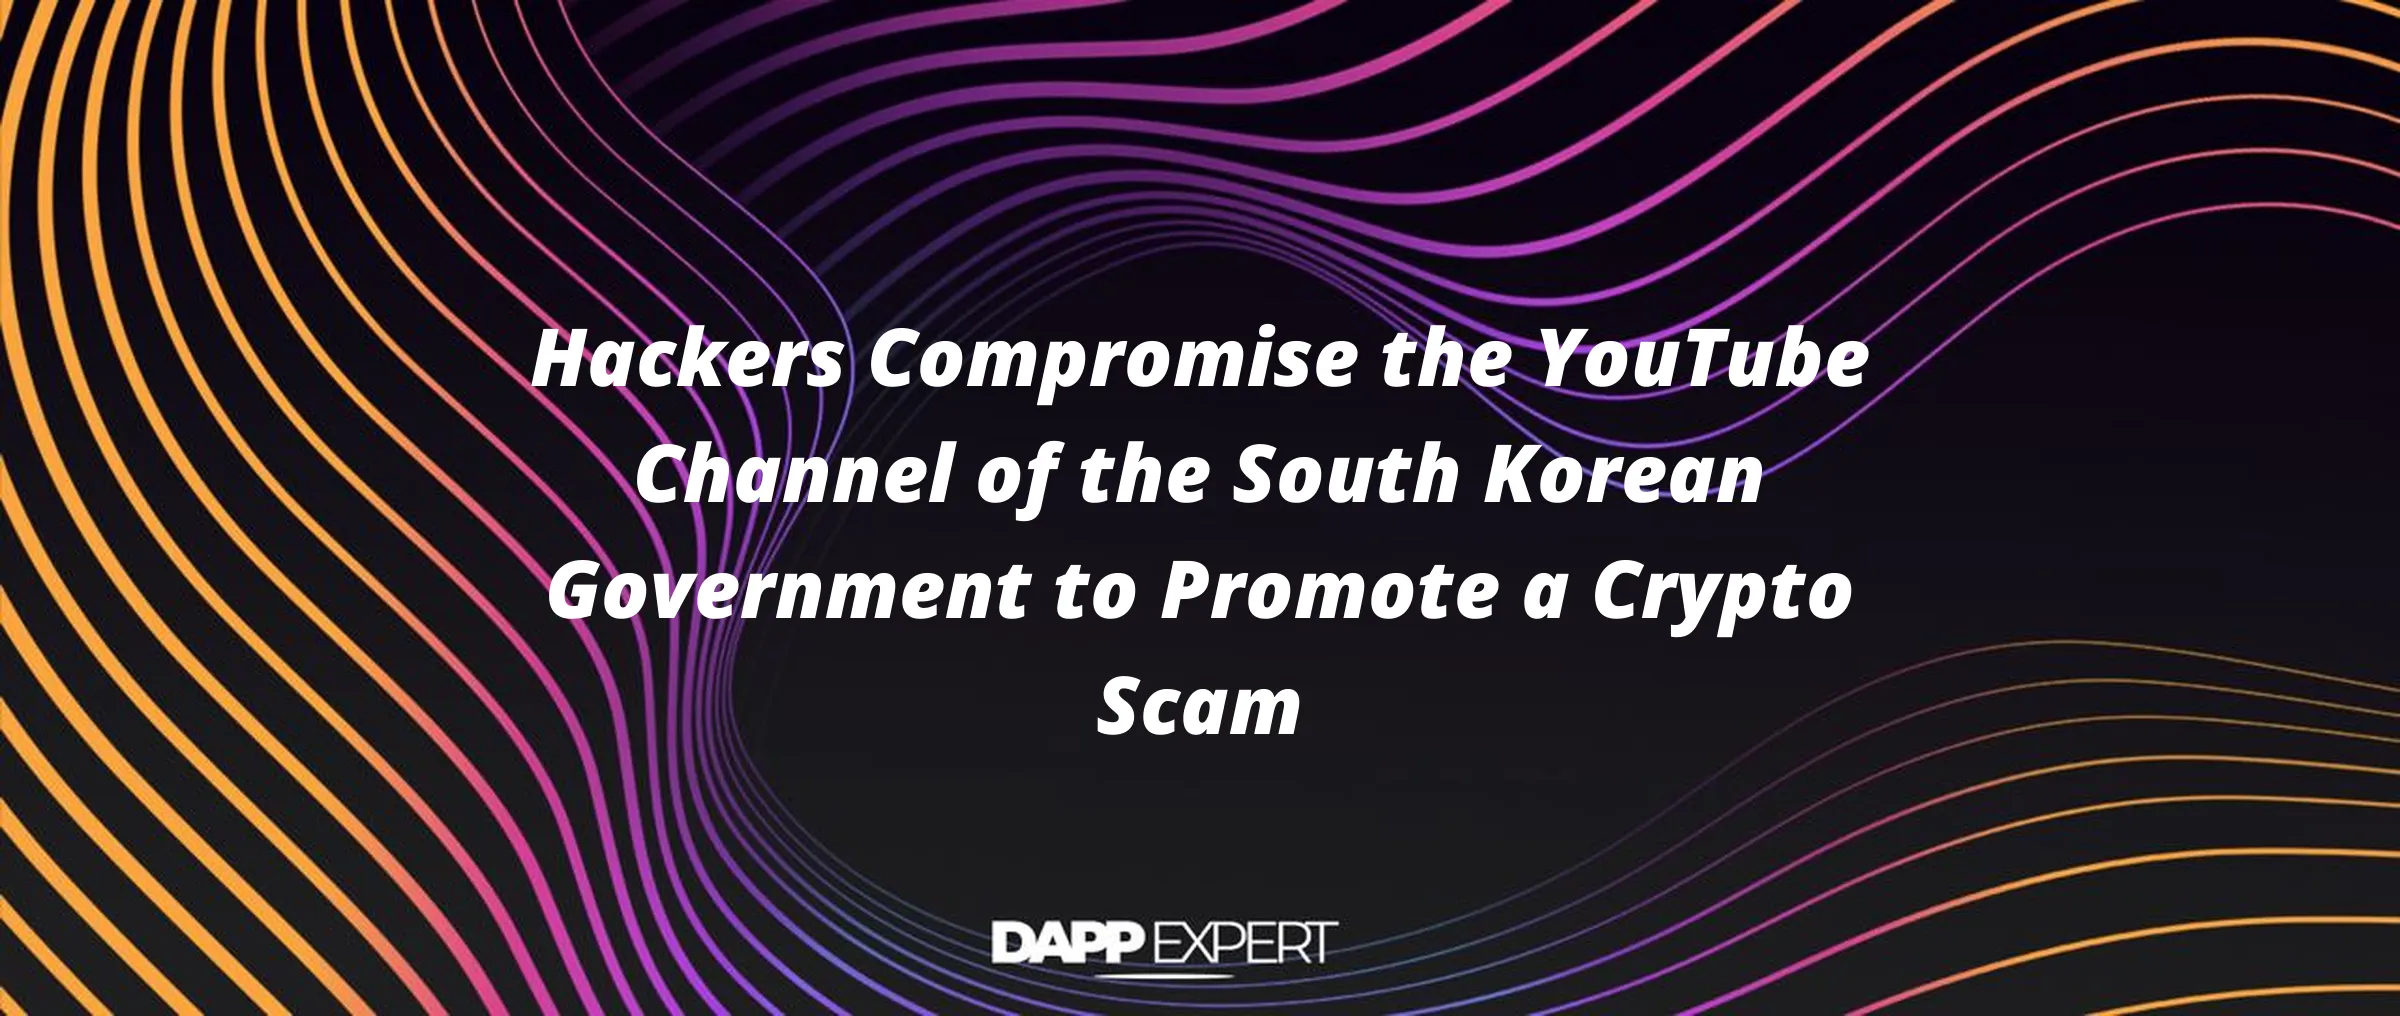 Hackers Compromise the YouTube Channel of the South Korean Government to Promote a Crypto Scam